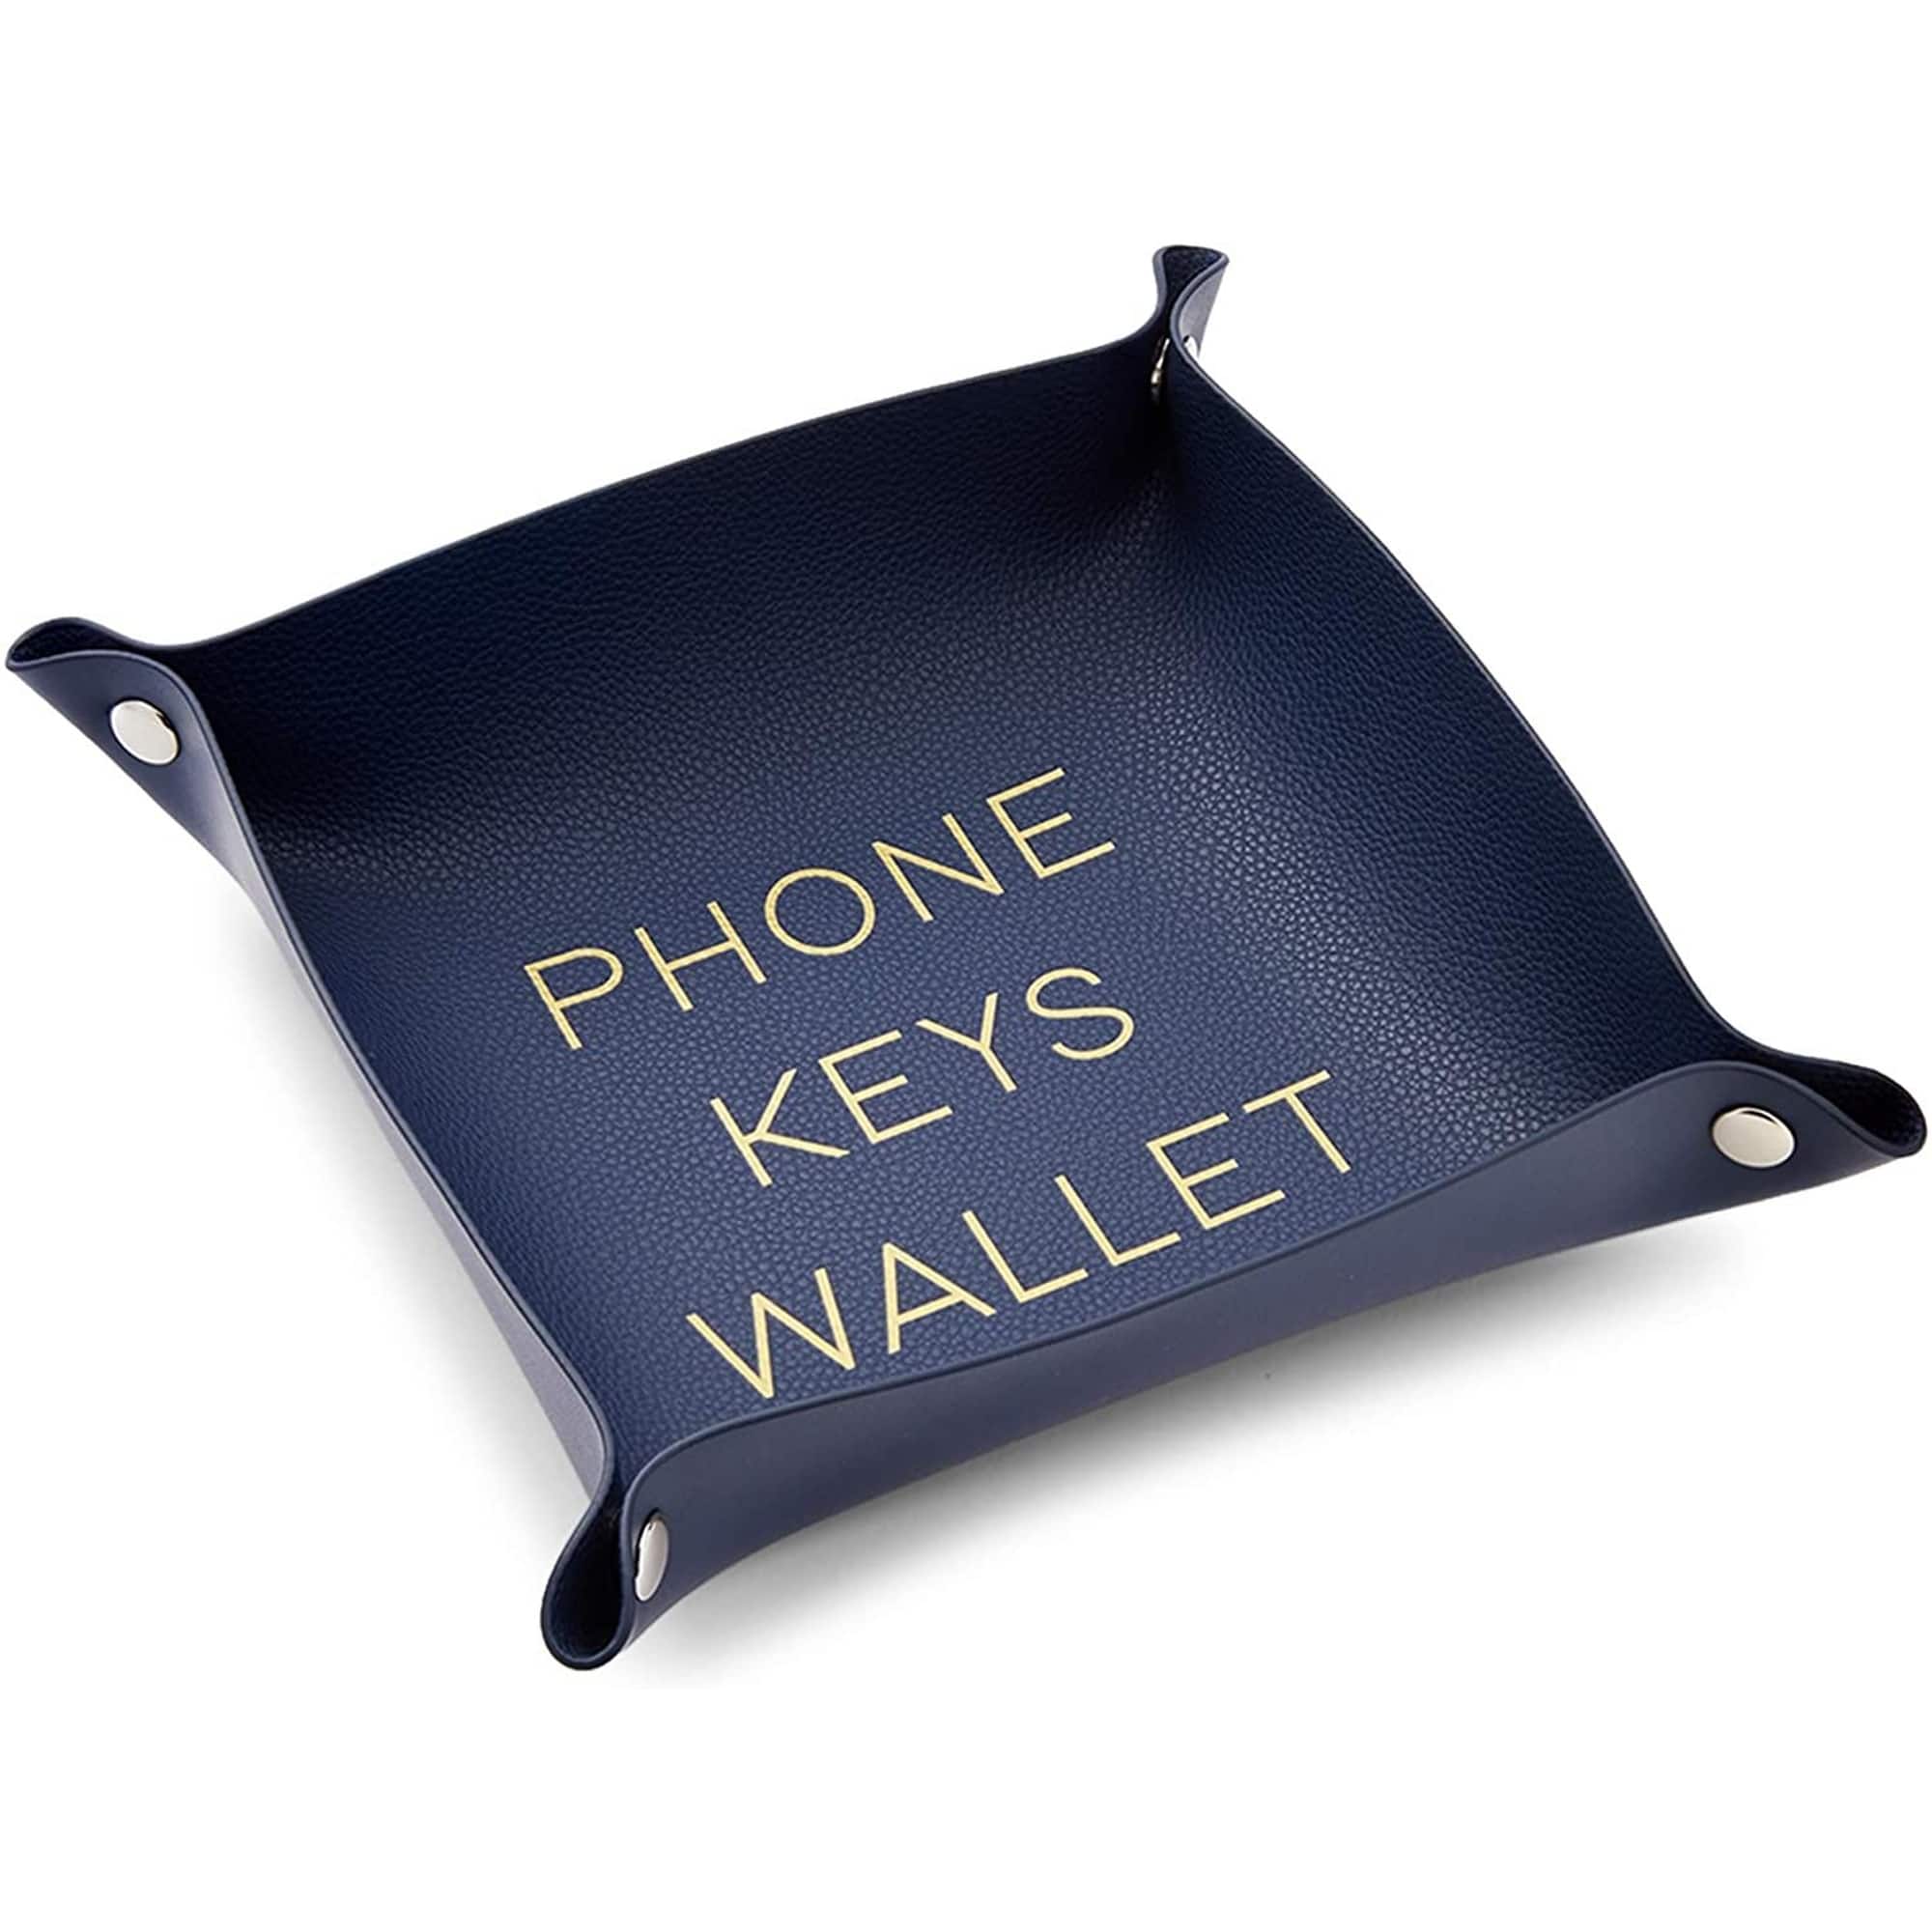 Juvale Leather Catchall Valet Tray for Phone, Keys, Wallet (Navy Blue ...